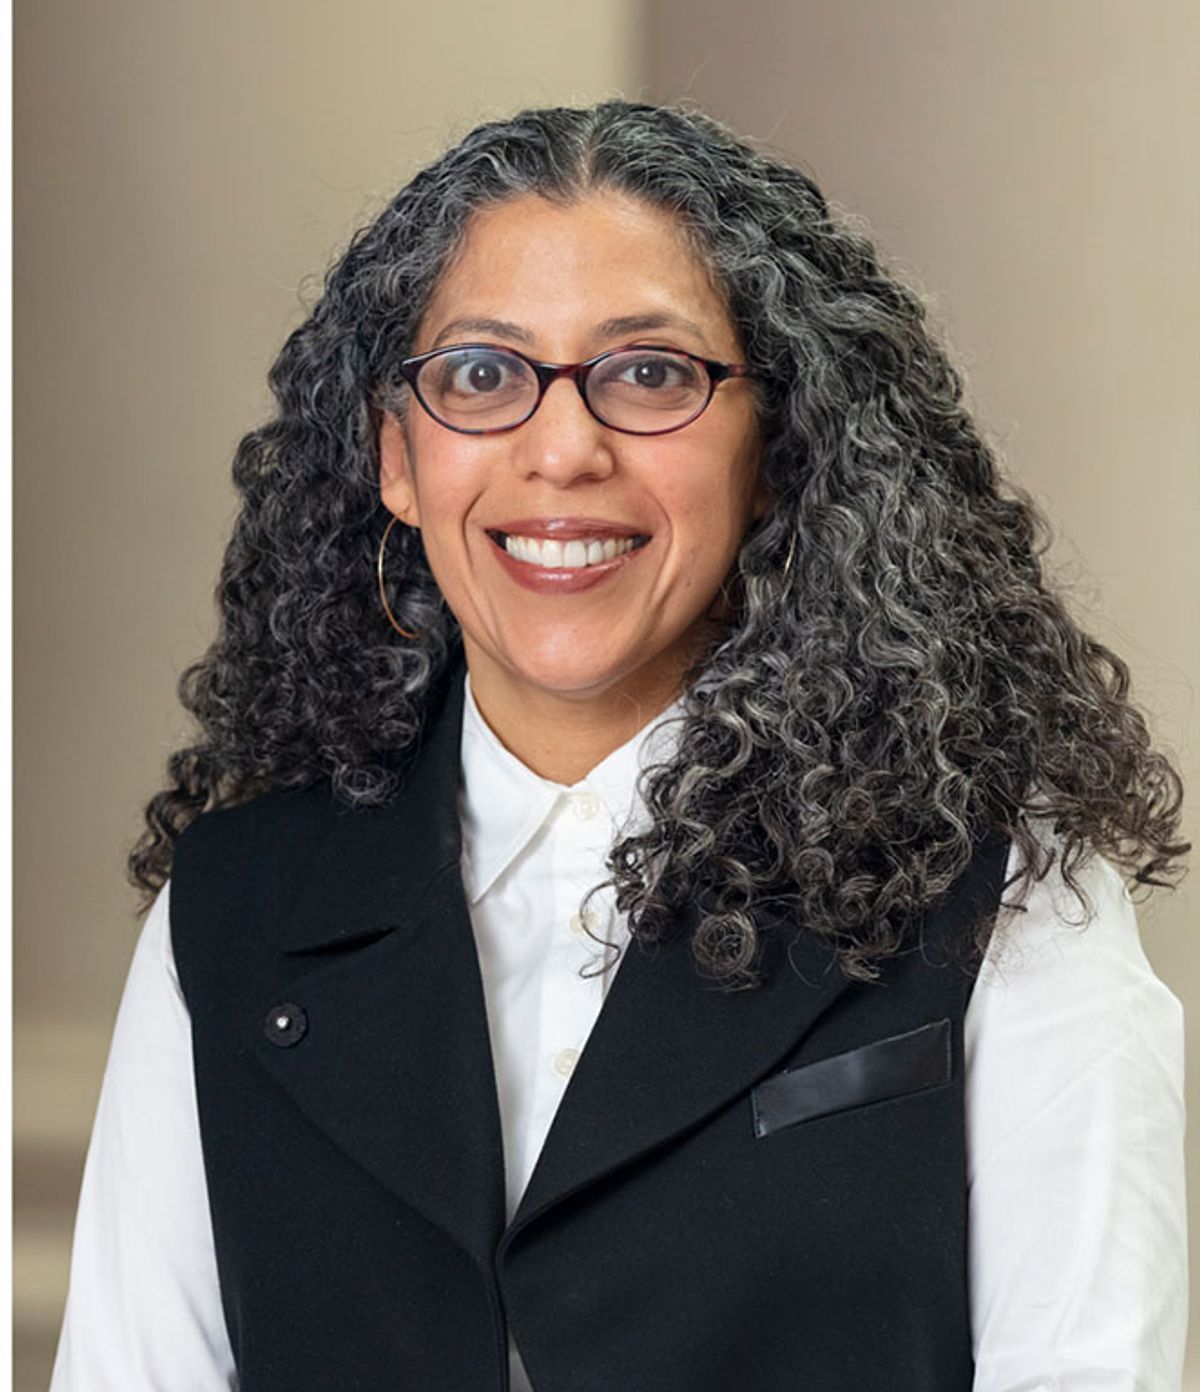 E. Carmen Ramos, who has been appointed chief curatorial and conservation officer at the National Gallery of Art © 2021 Board of Trustees, National Gallery of Art, Washington